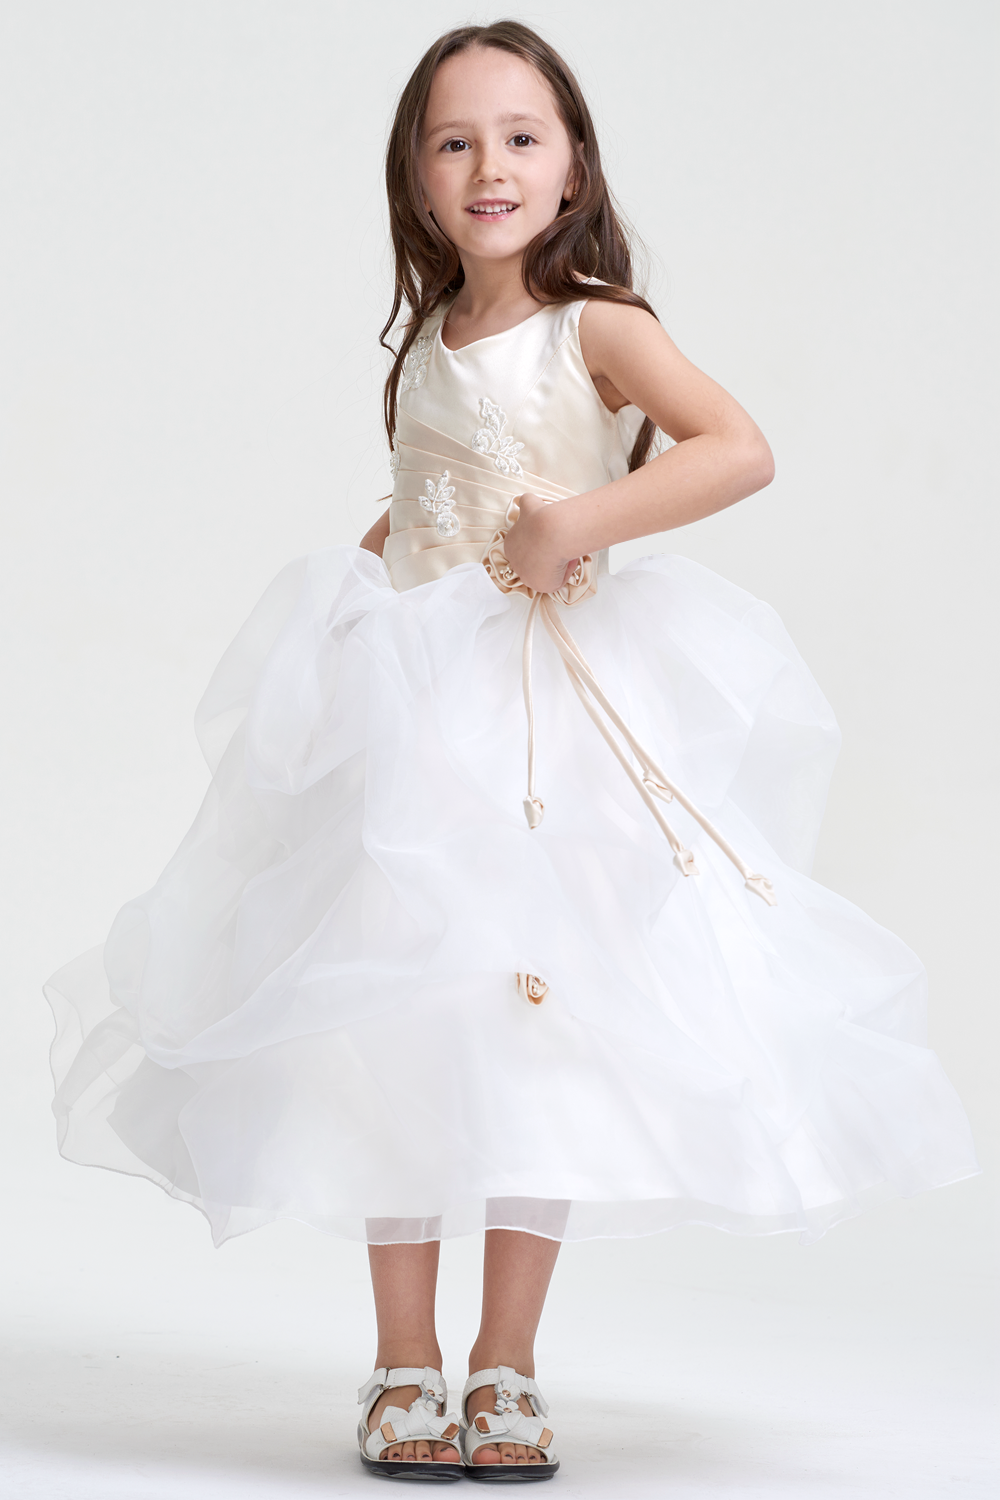 Colored  Scoop Neck Flower Girl Dresses with Handmade Flowers